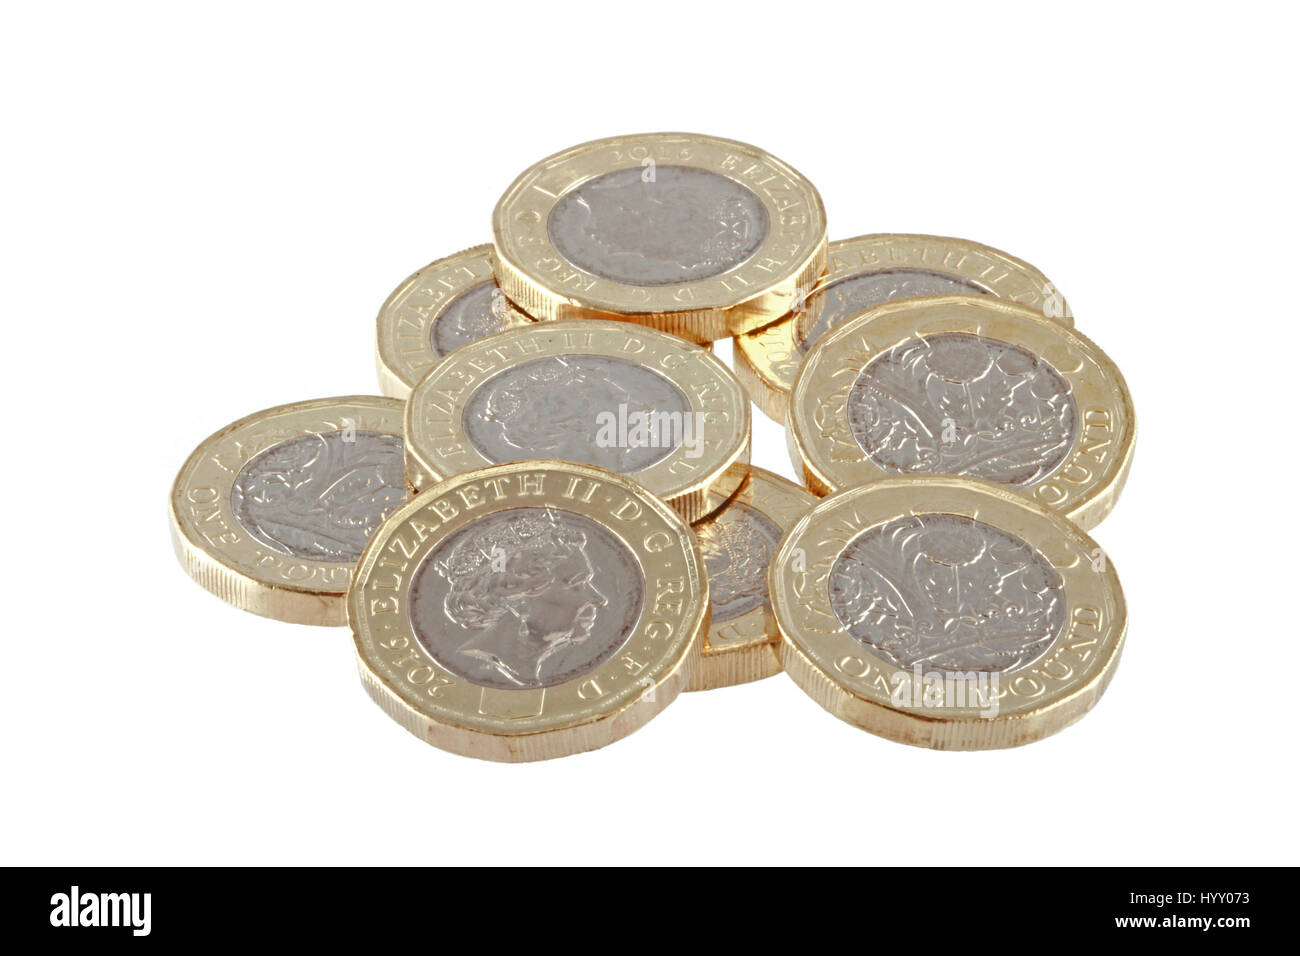 The new British one pound coin was released into circulation on March 28 2017. Stock Photo